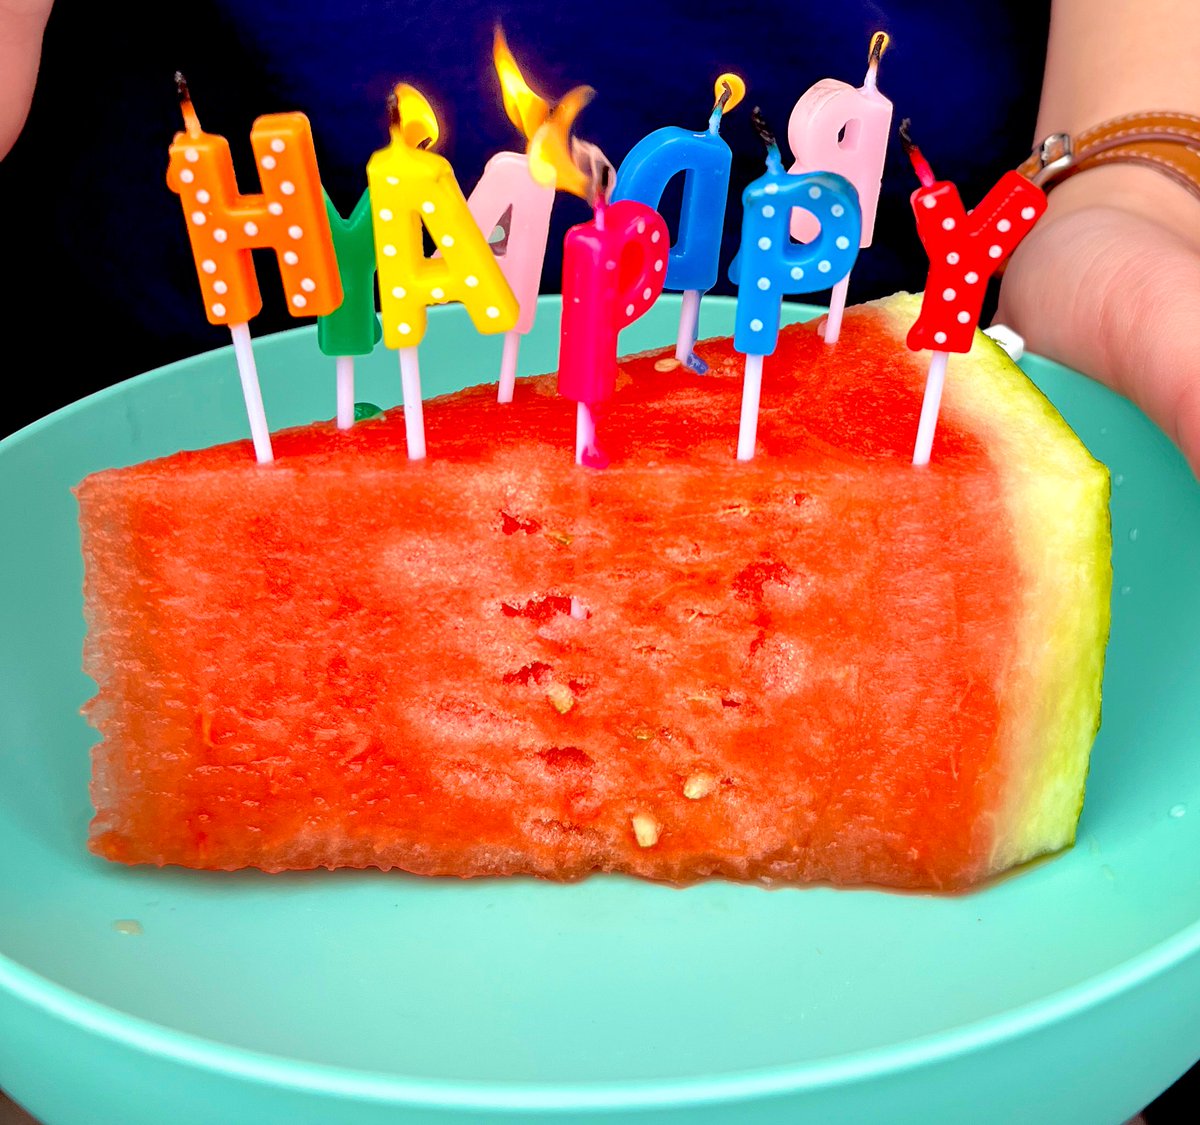 This is my birthday cake. Happy birthday to me 🍉